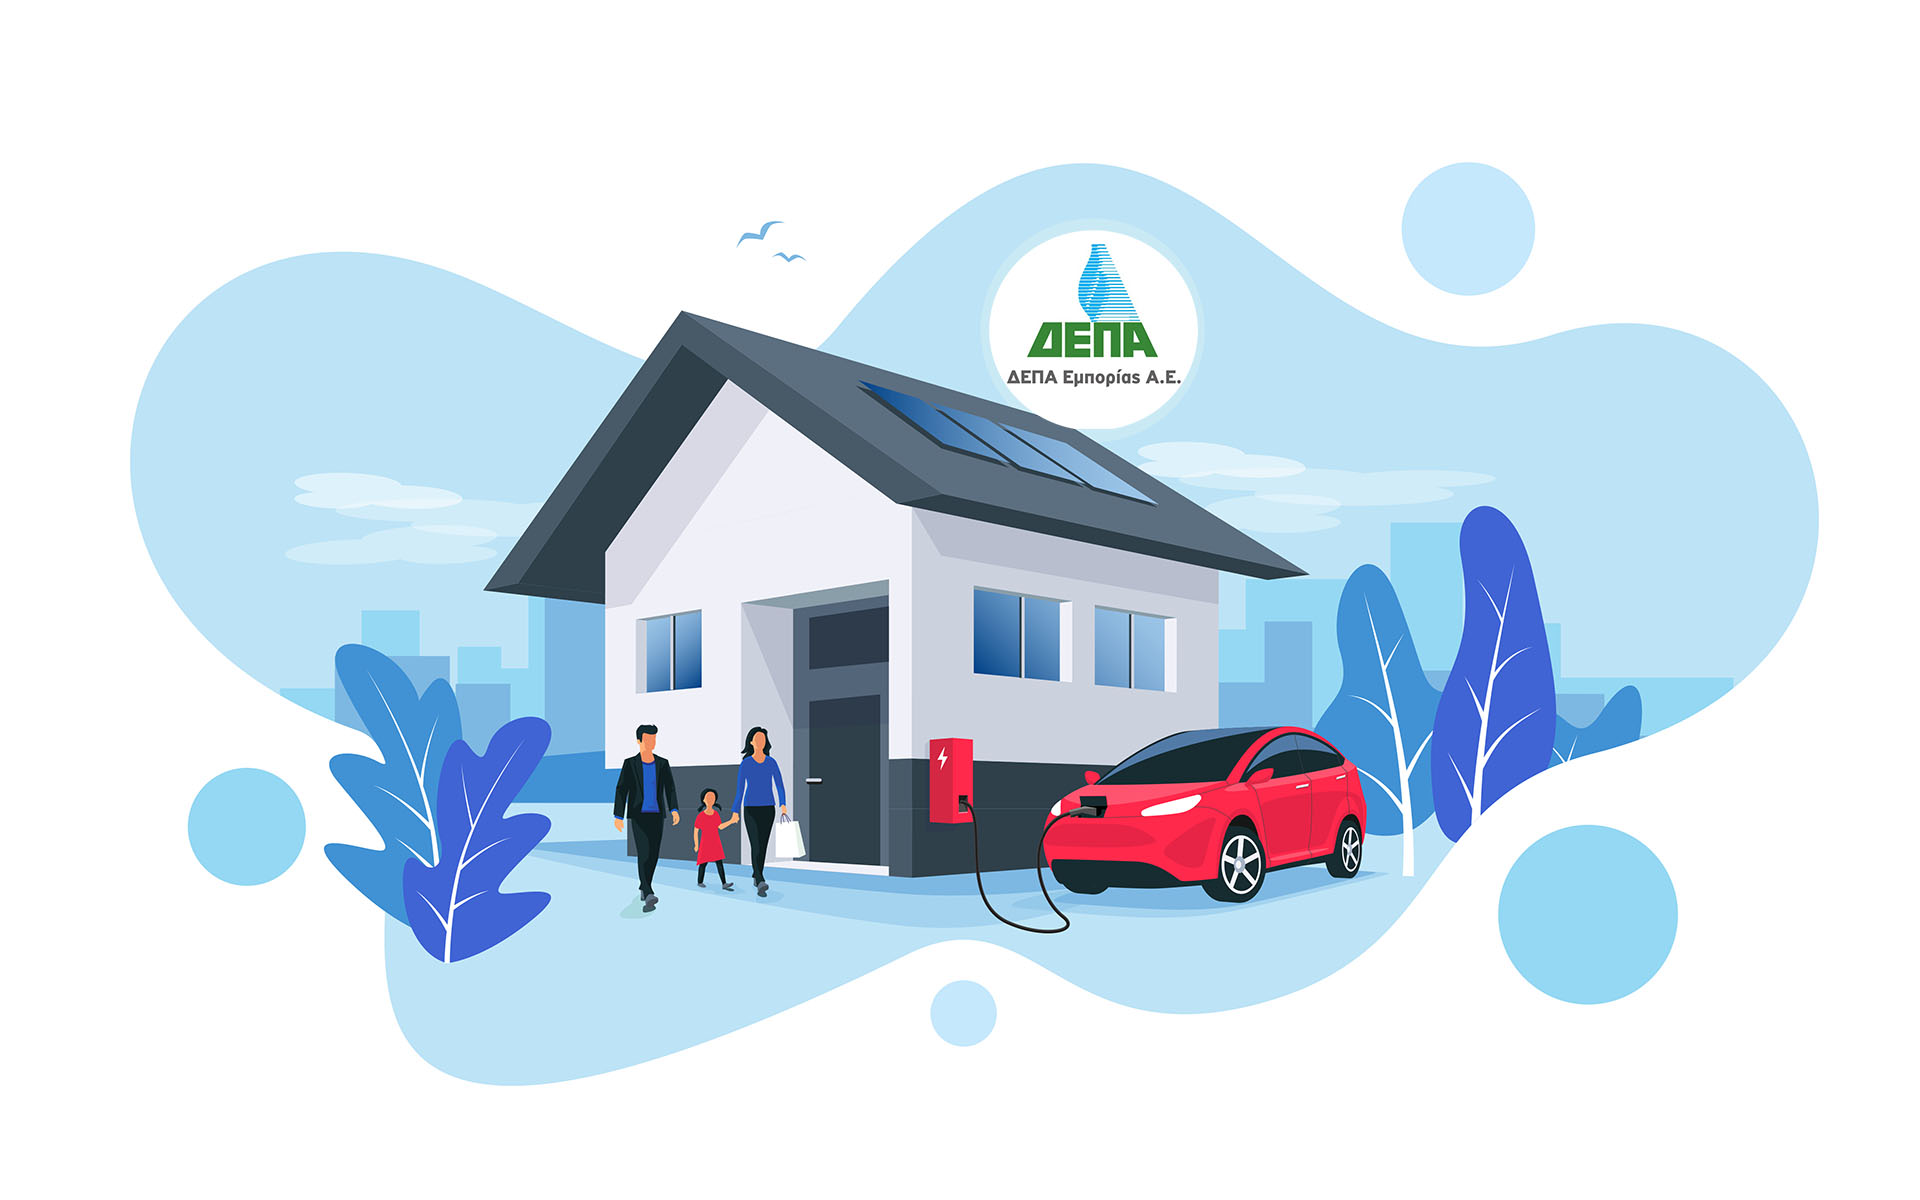 Electric car parking charging at home wall box charger station on house with a family. Renewable energy storage with solar panels and smart city skyline in background. Vector illustration.